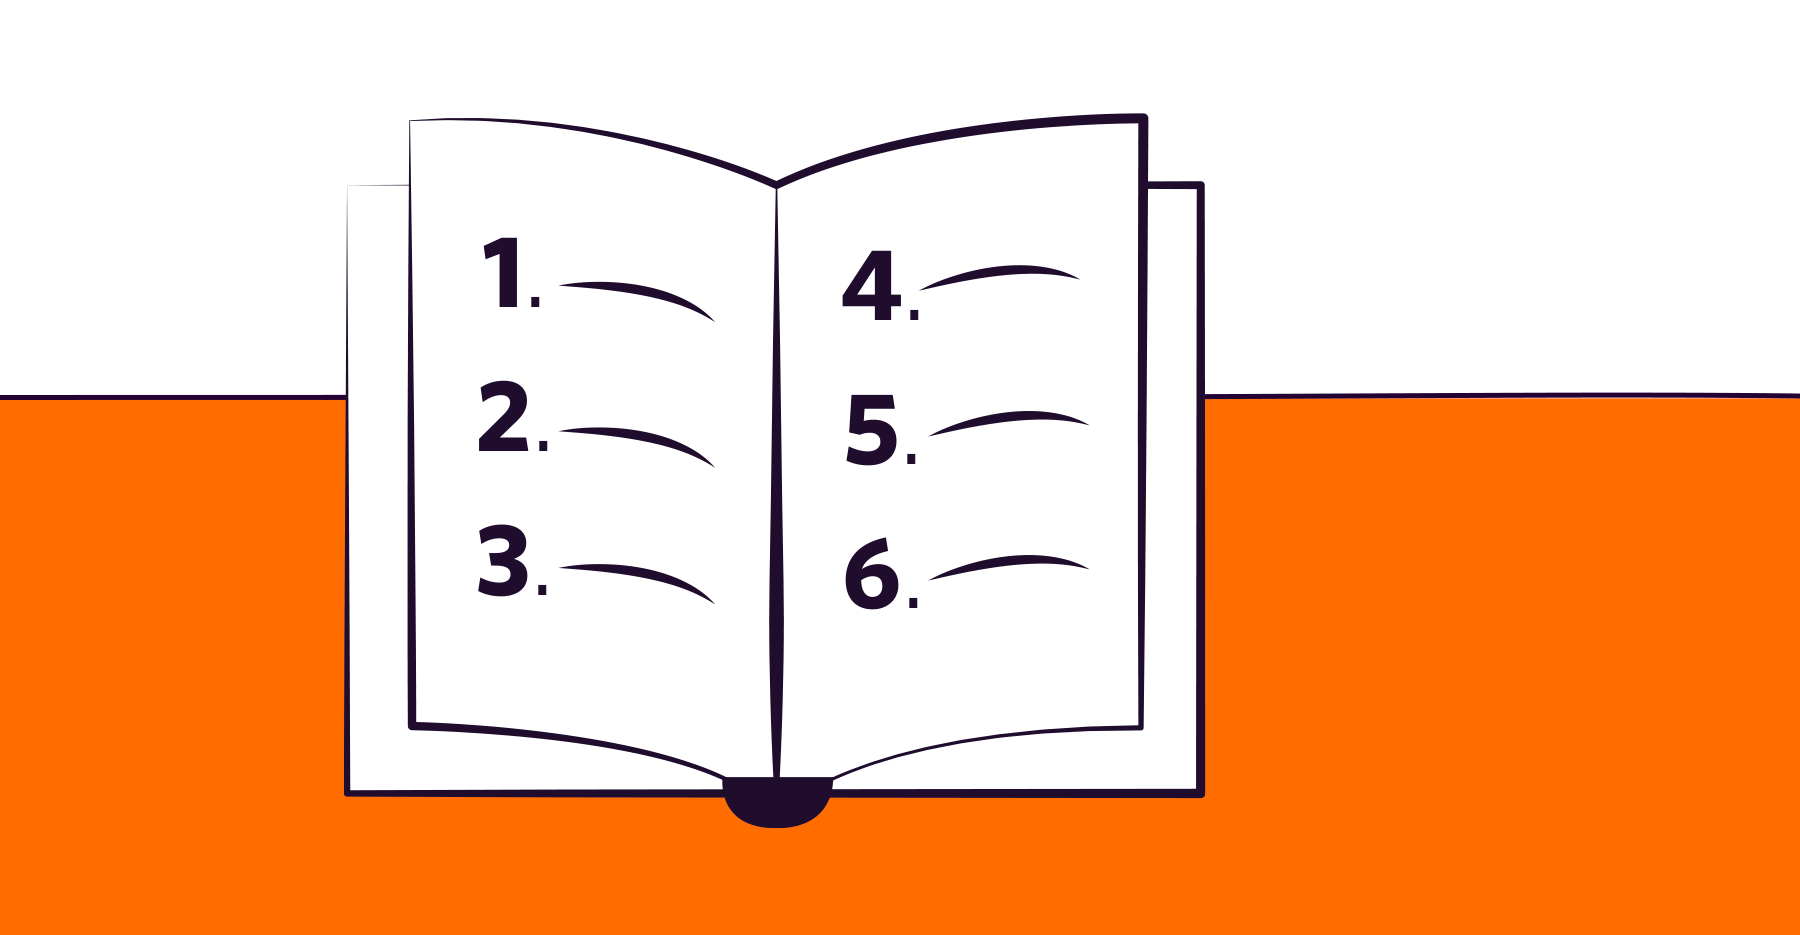 An illustration of a book with a list in it over an orange background